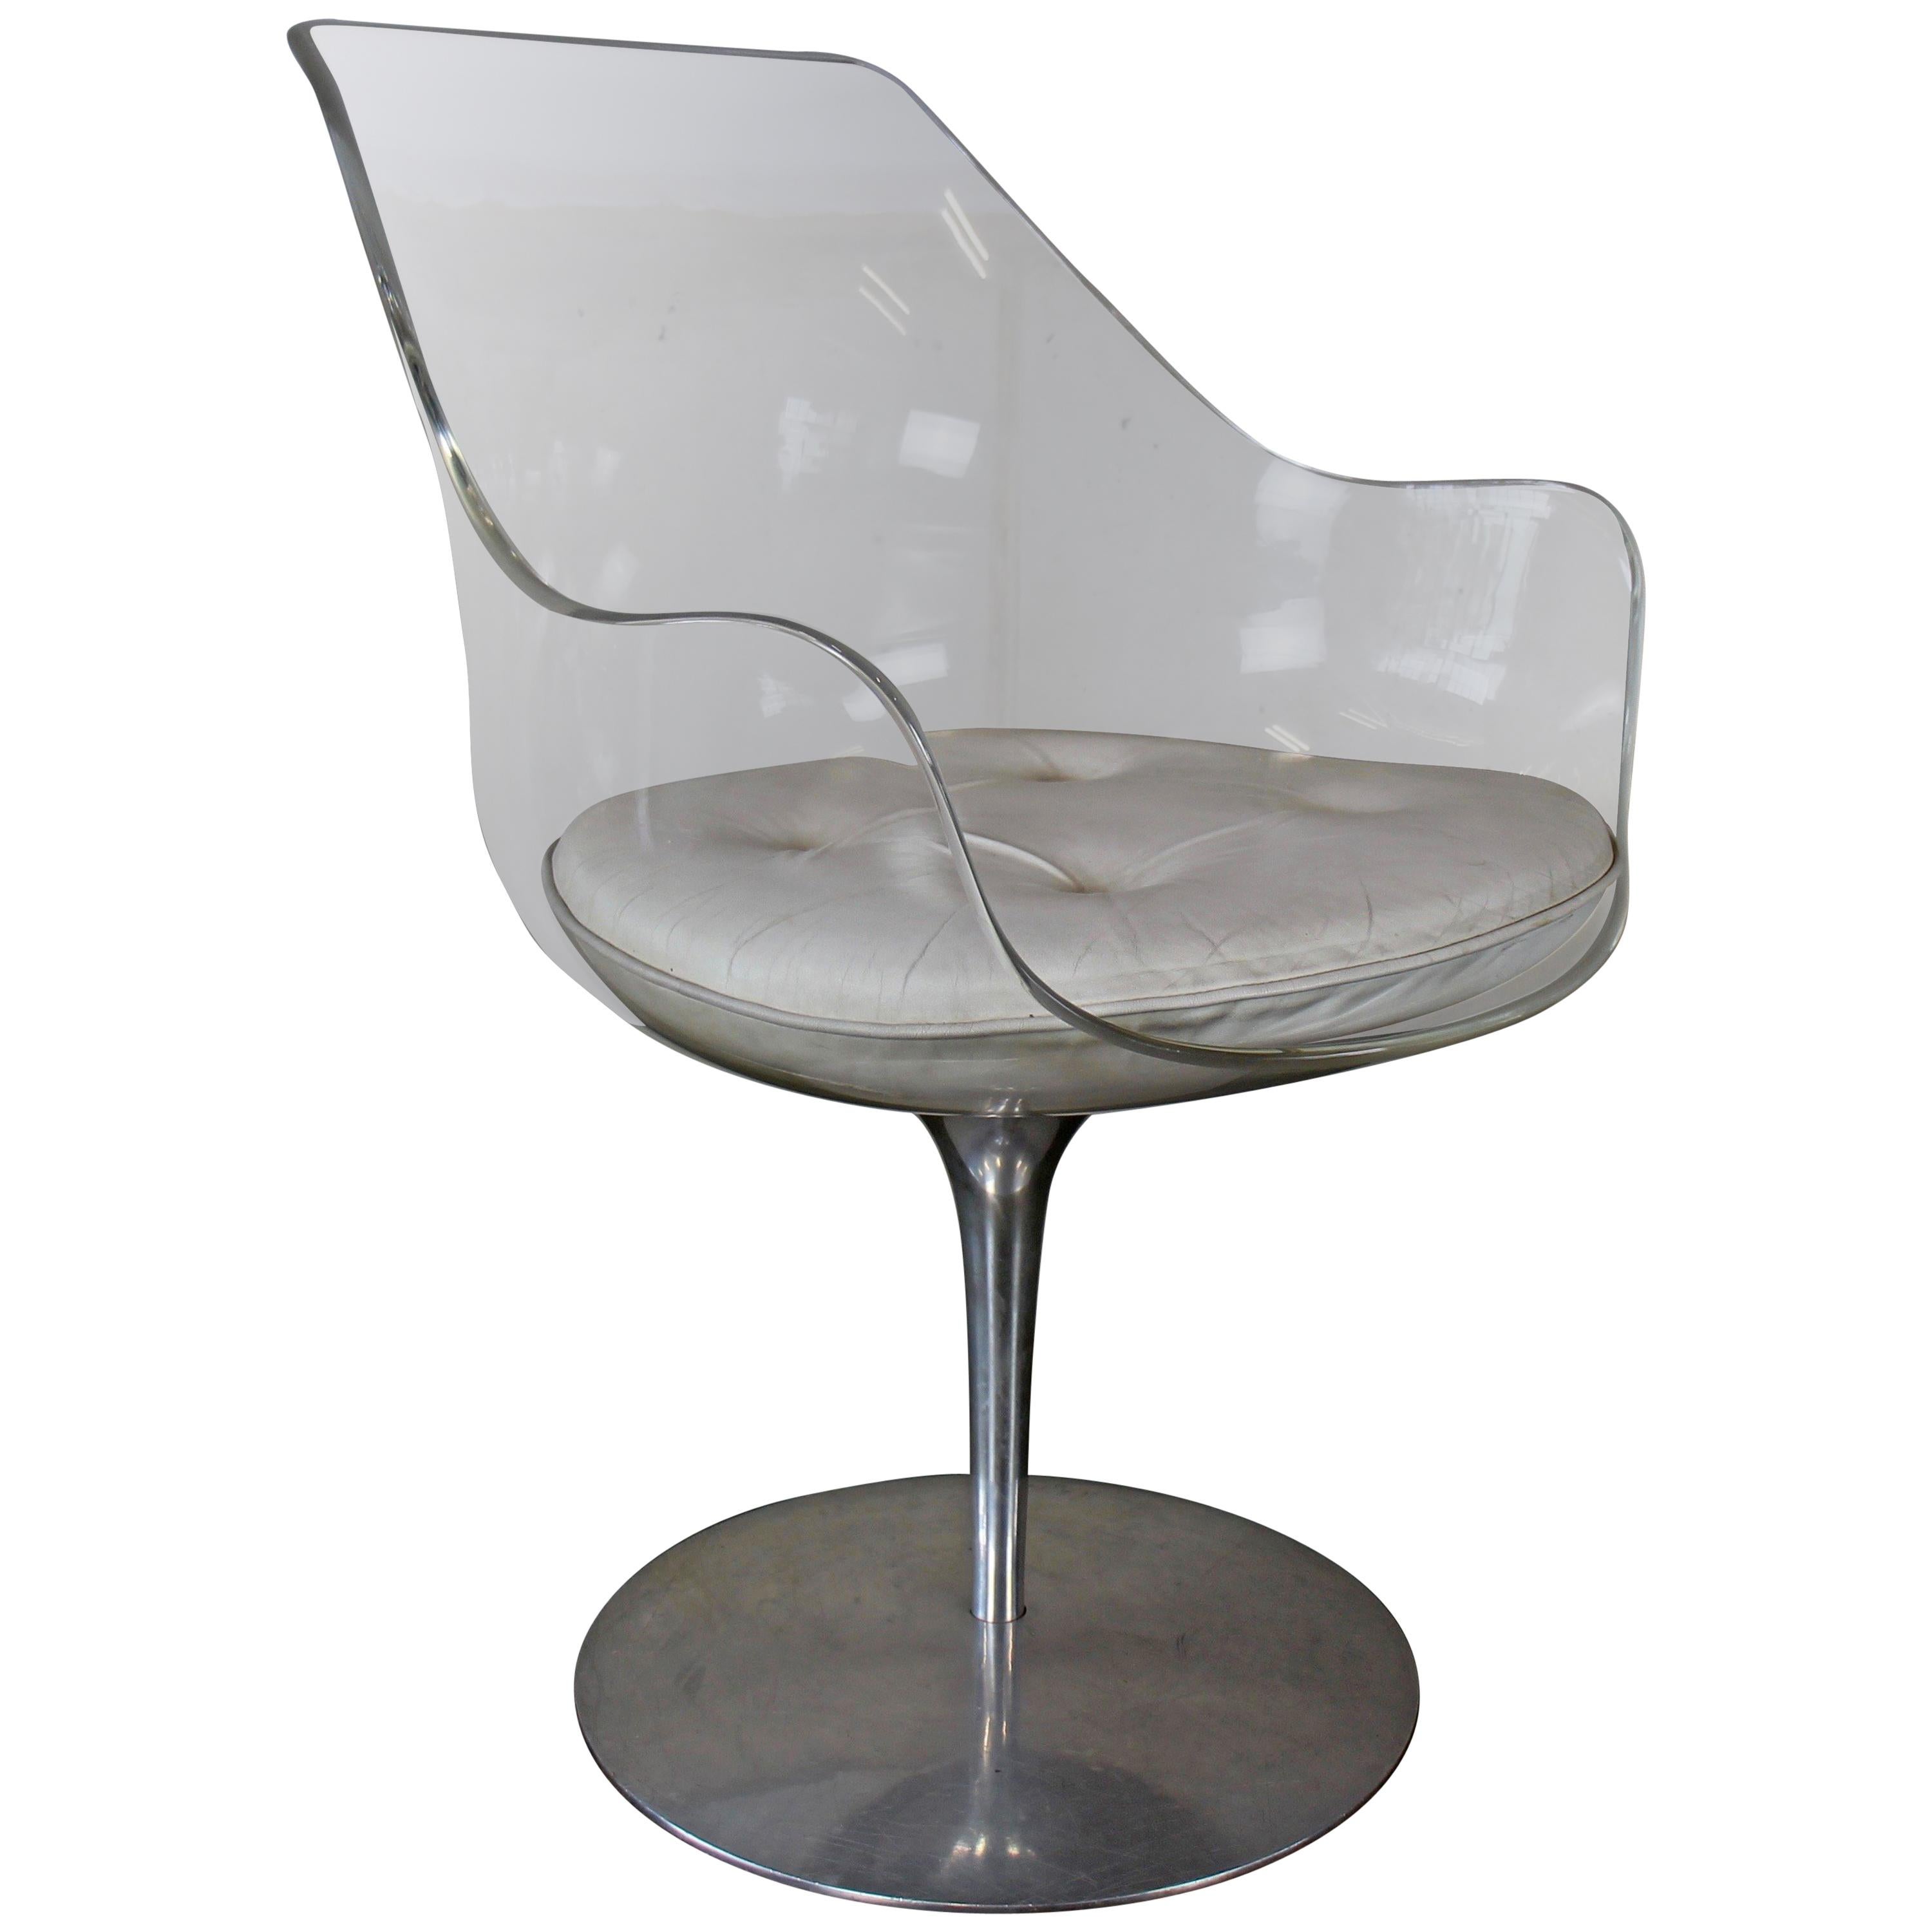 Champagne chair by Erwine and Estelle Laverne for Formes Nouvelles, USA, 1960s